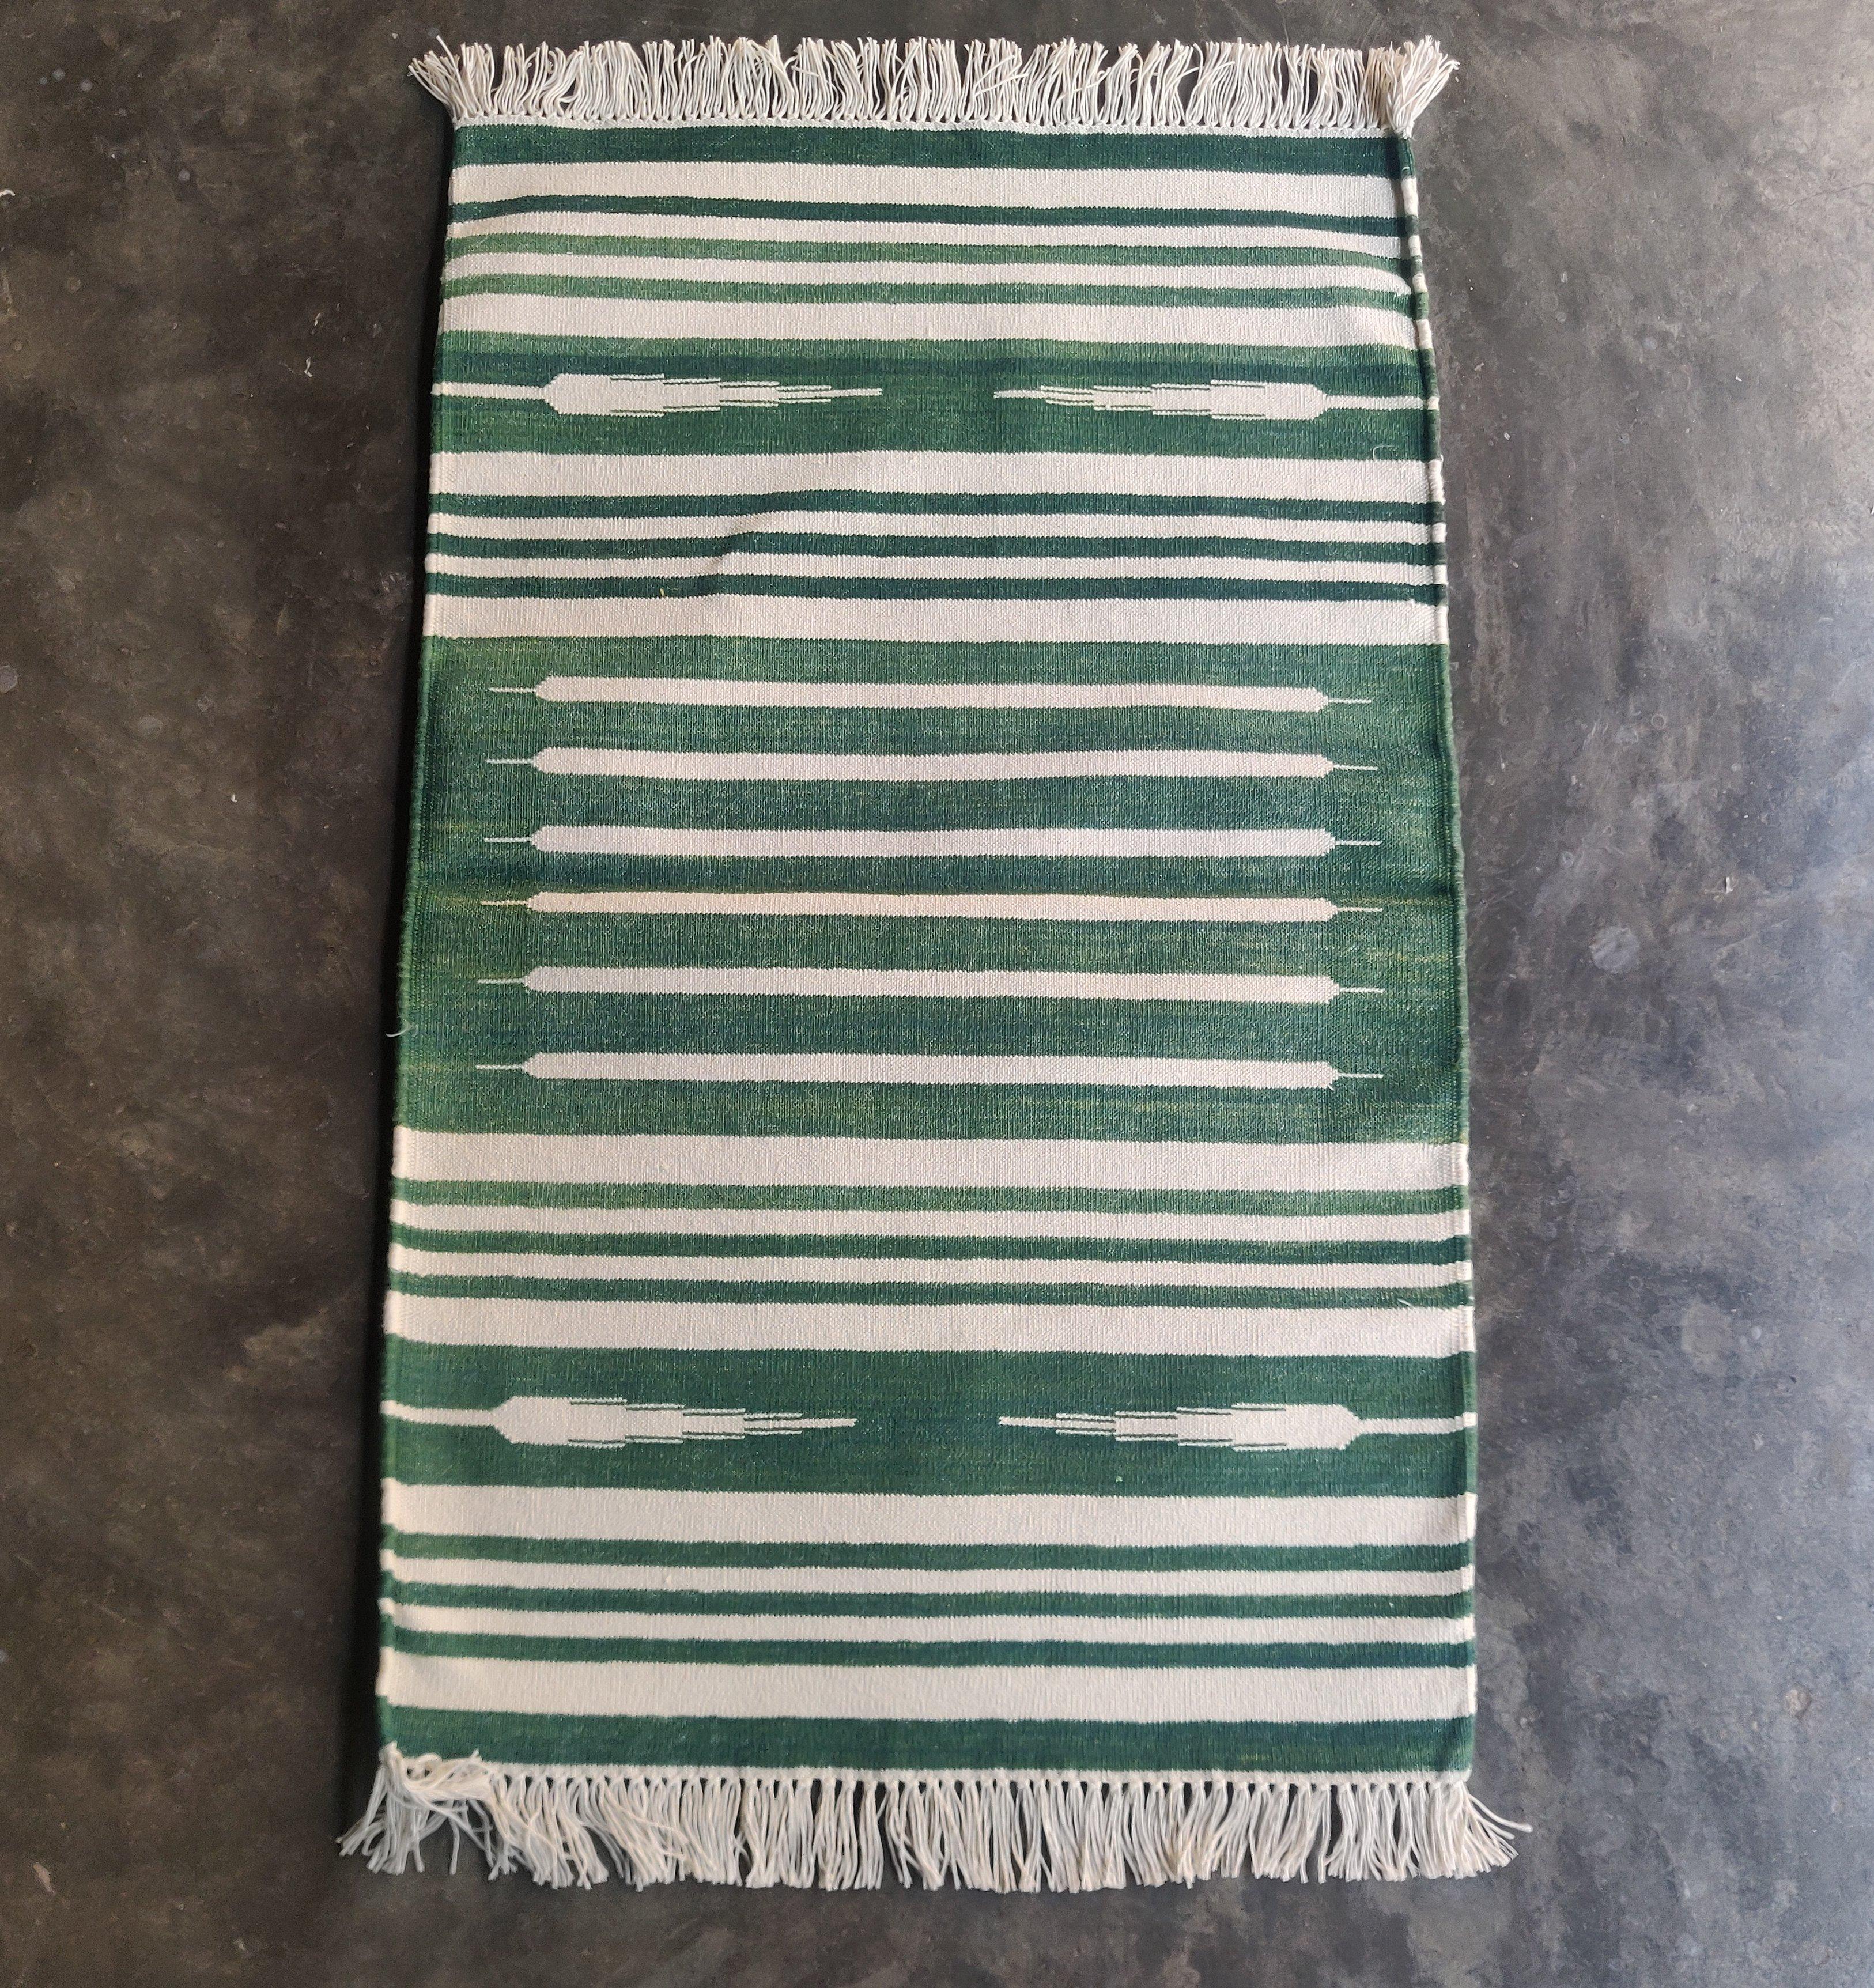 Hand-Woven Handmade Cotton Area Flat Weave Rug, 2x3 Green And White Striped Indian Dhurrie For Sale